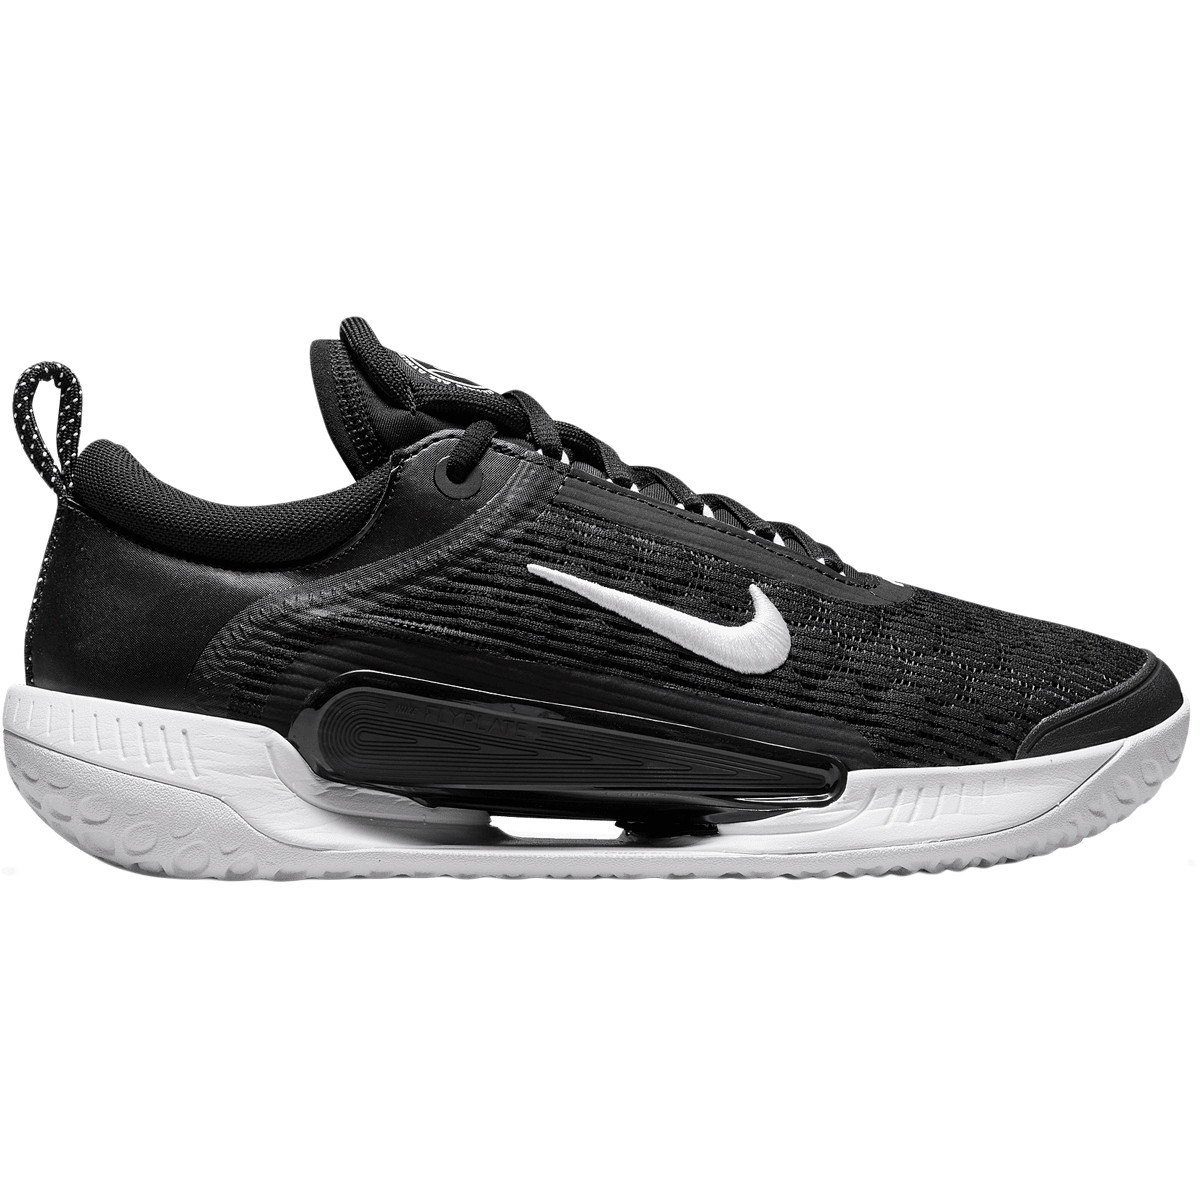 CHAUSSURES NIKE ZOOM COURT NXT SURFACES DURES - NIKE - Homme - Chaussures